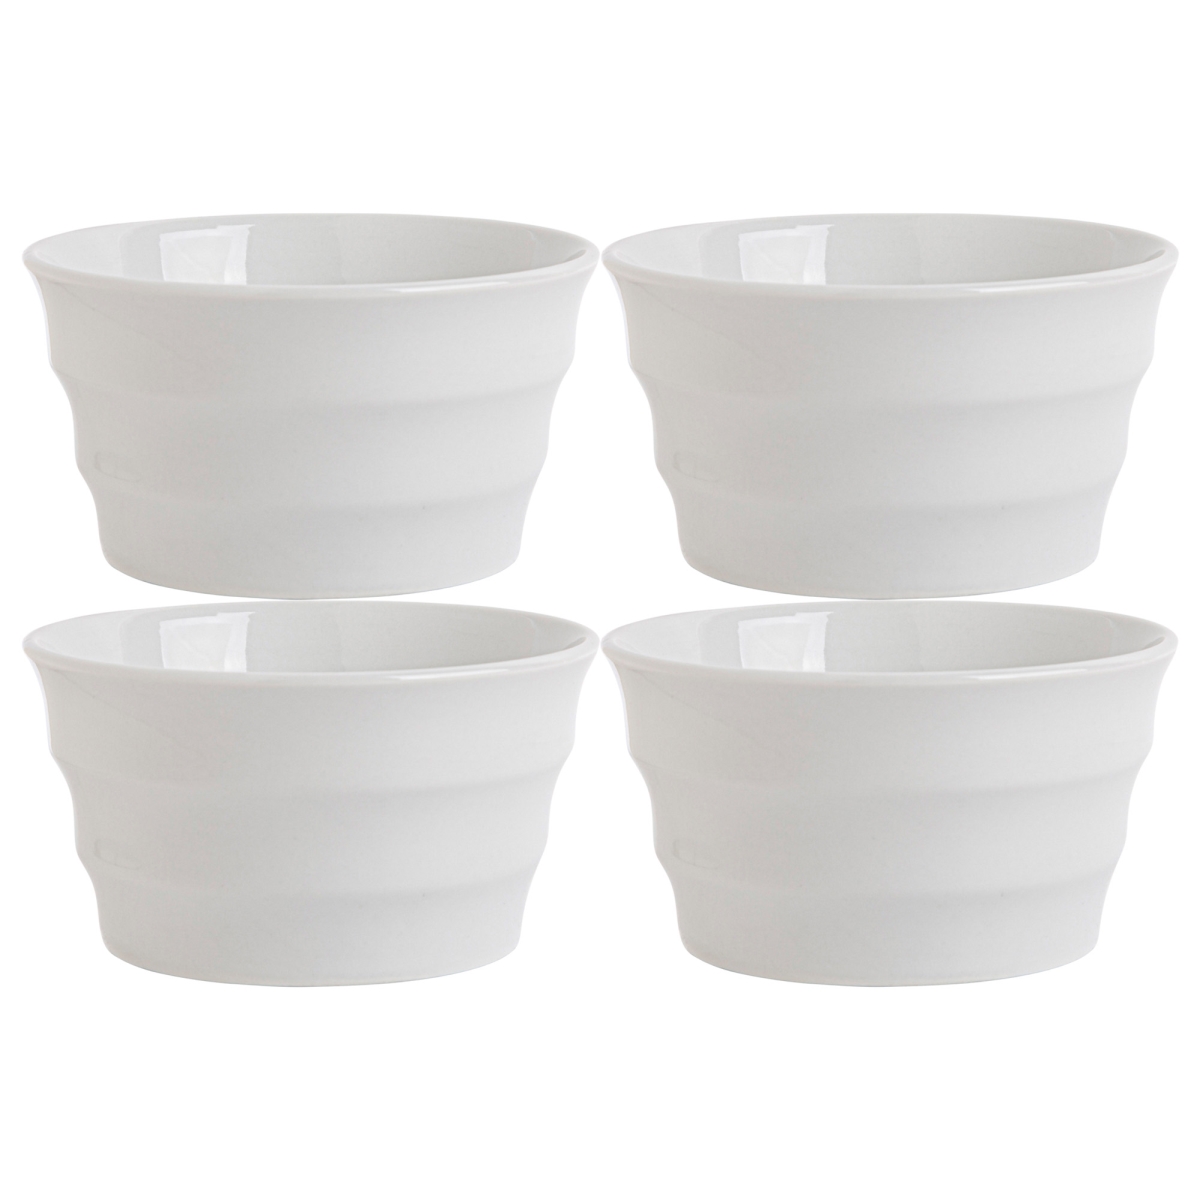 Picture of Home Essentials & Beyond 15997 8 oz White Tapered Ramekin - Set of 4